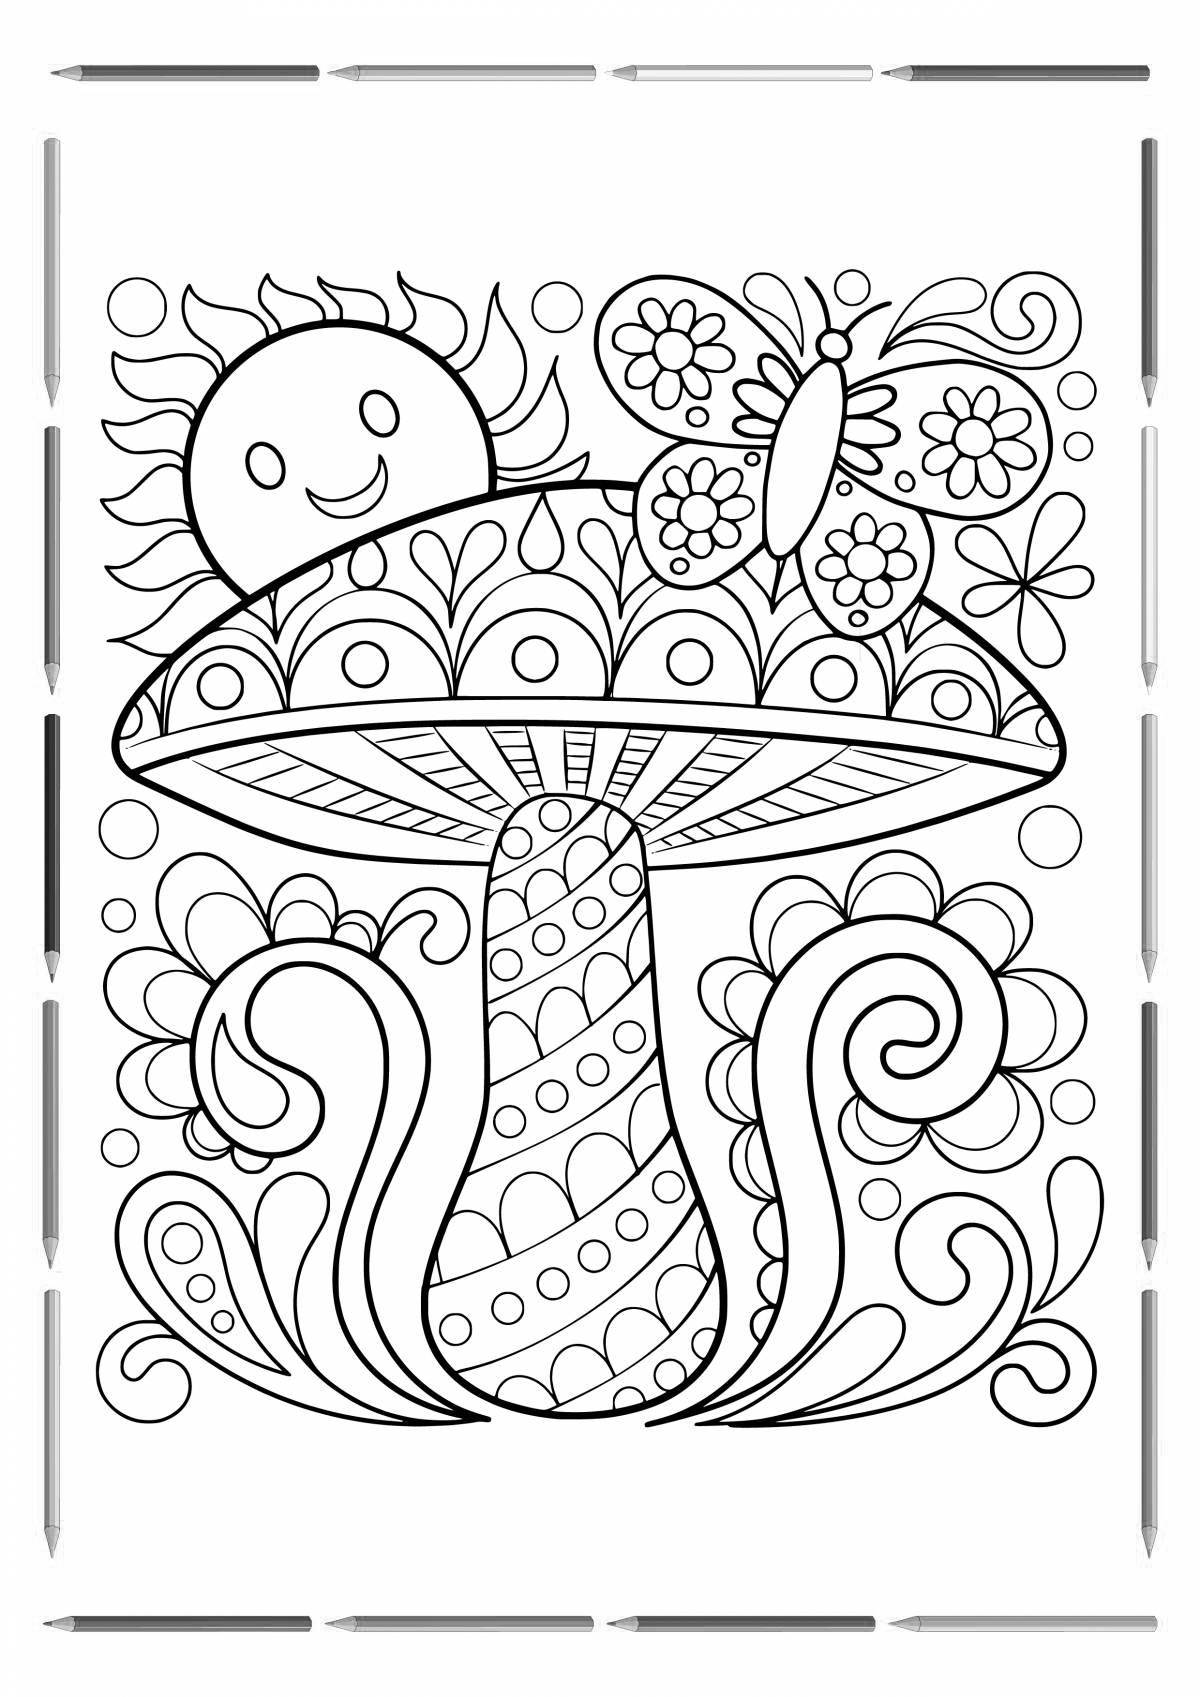 Intriguing coloring book interesting for kids